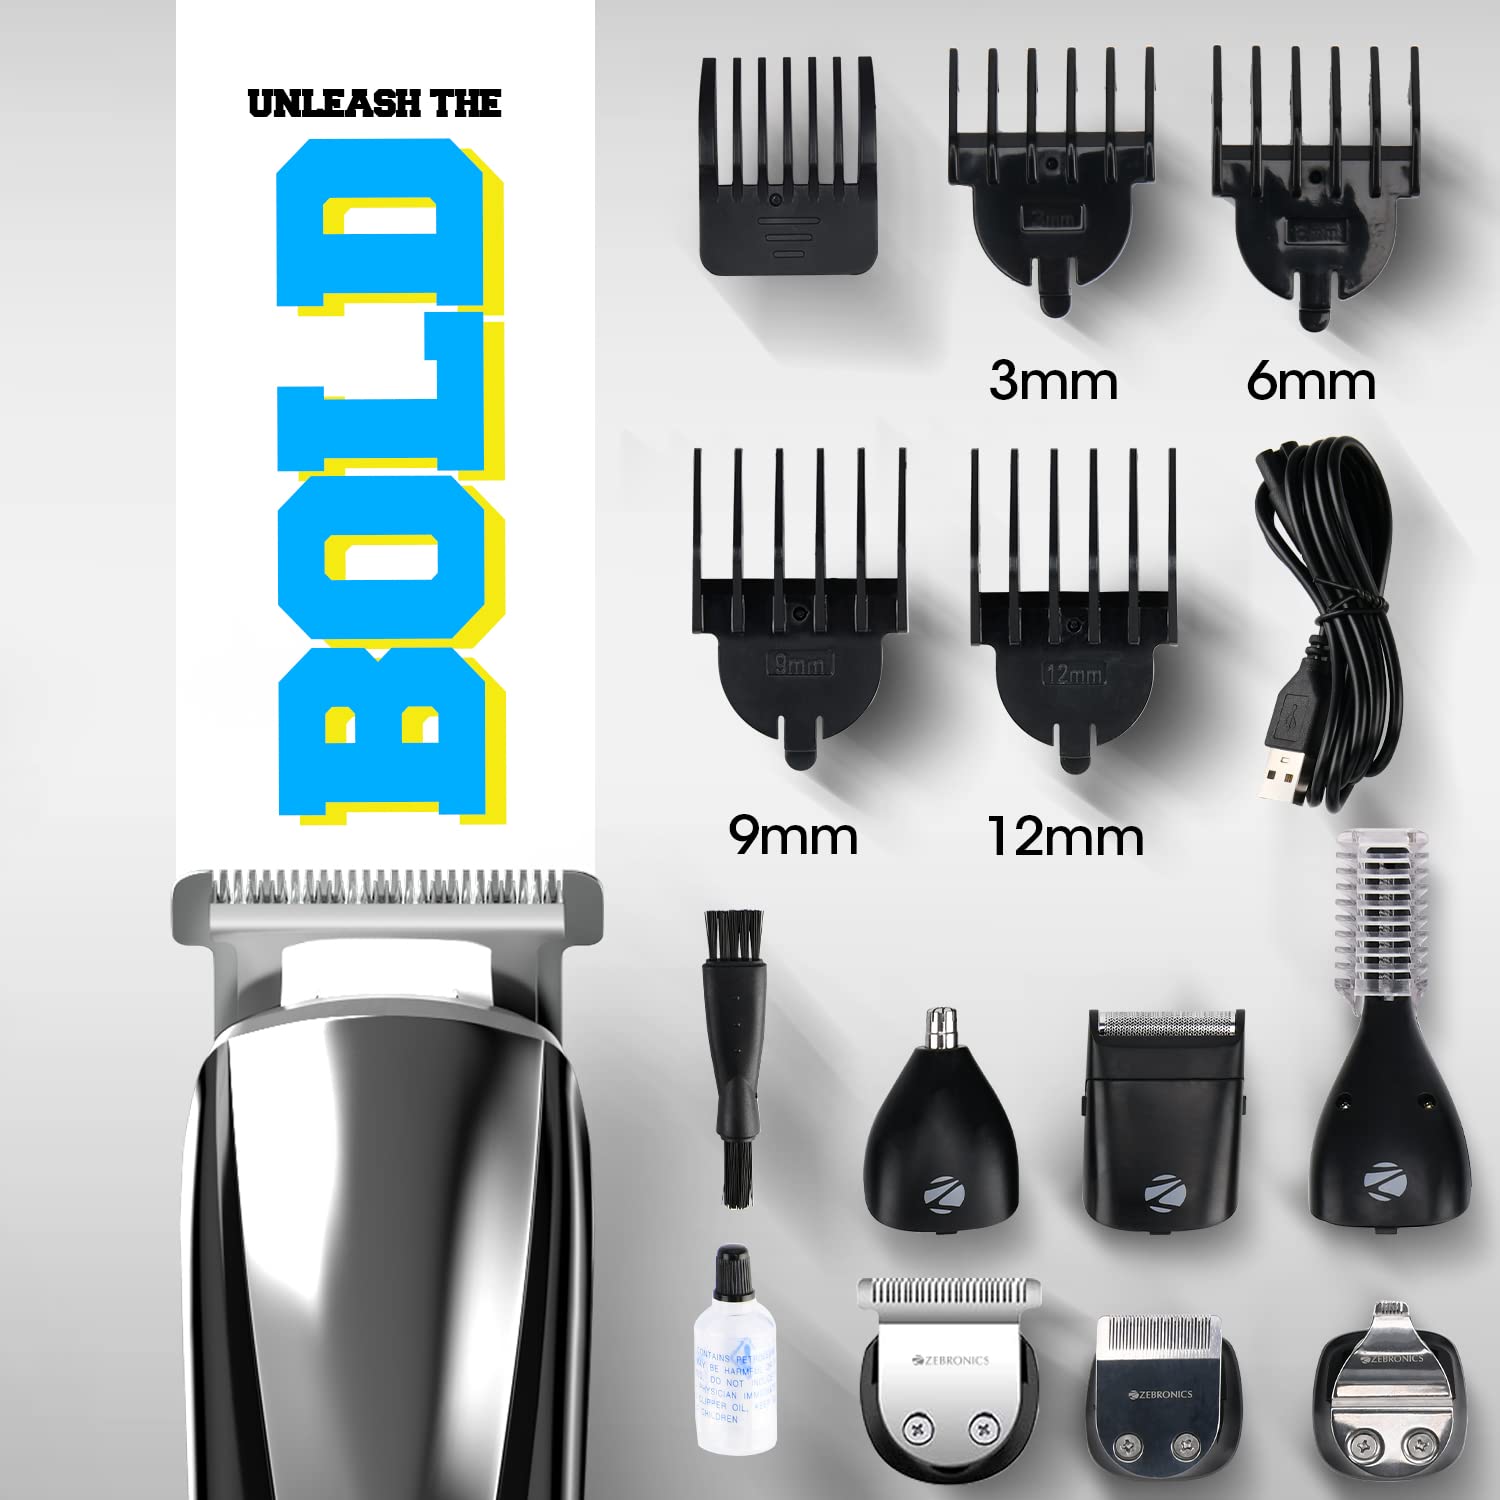 Zebronics ZEB-HT106 6 in 1 Grooming kit with Cordless/Cord use Trimmer-Trimmer-dealsplant